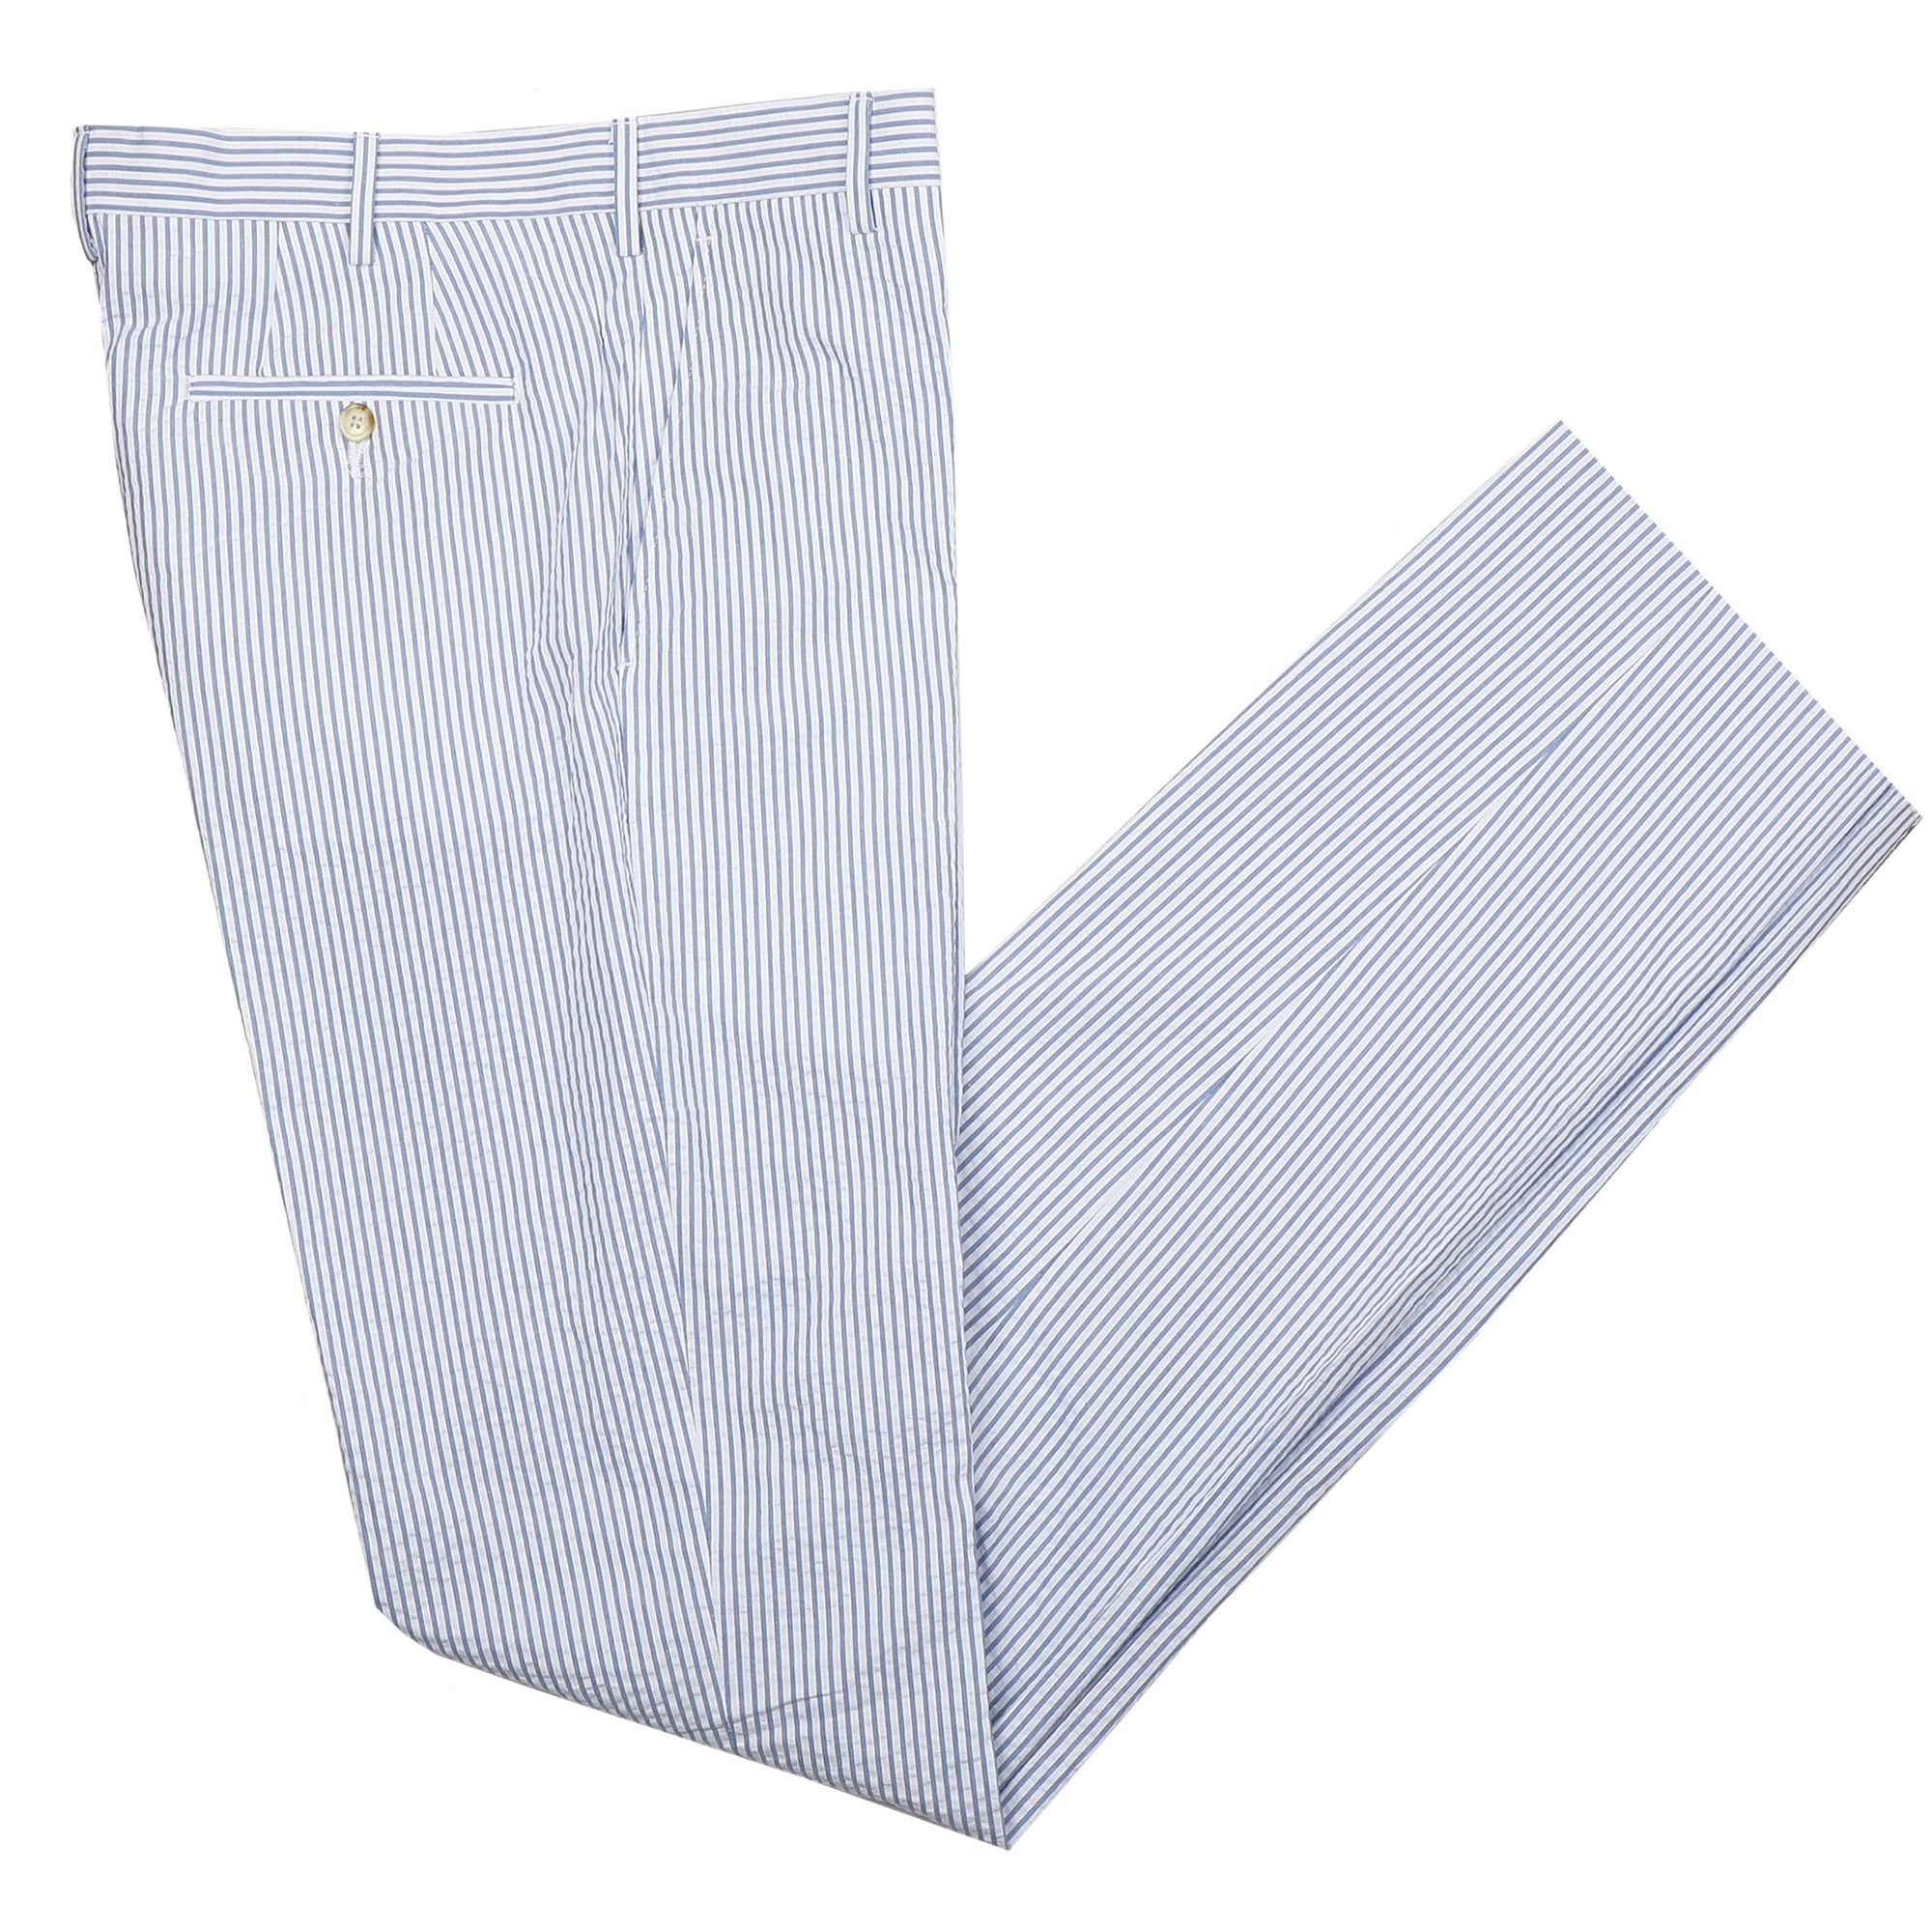 Experience the breezy, classic charm of our Algiers Navy / White Seersucker Pant. These stunning New Orleans-inspired trousers are perfect for your next summer outing. Cut from lightweight seersucker fabric, they combine timeless Tan and White stripes with a relaxed fit for unbeatable comfort and style. Try them this season for a look that radiates effortless elegance!  100% Cotton Seersucker • Algiers Fit • Flat Front • Tab Button Closure • Unfinished Bottom (37.5") • Dry Clean • Imported